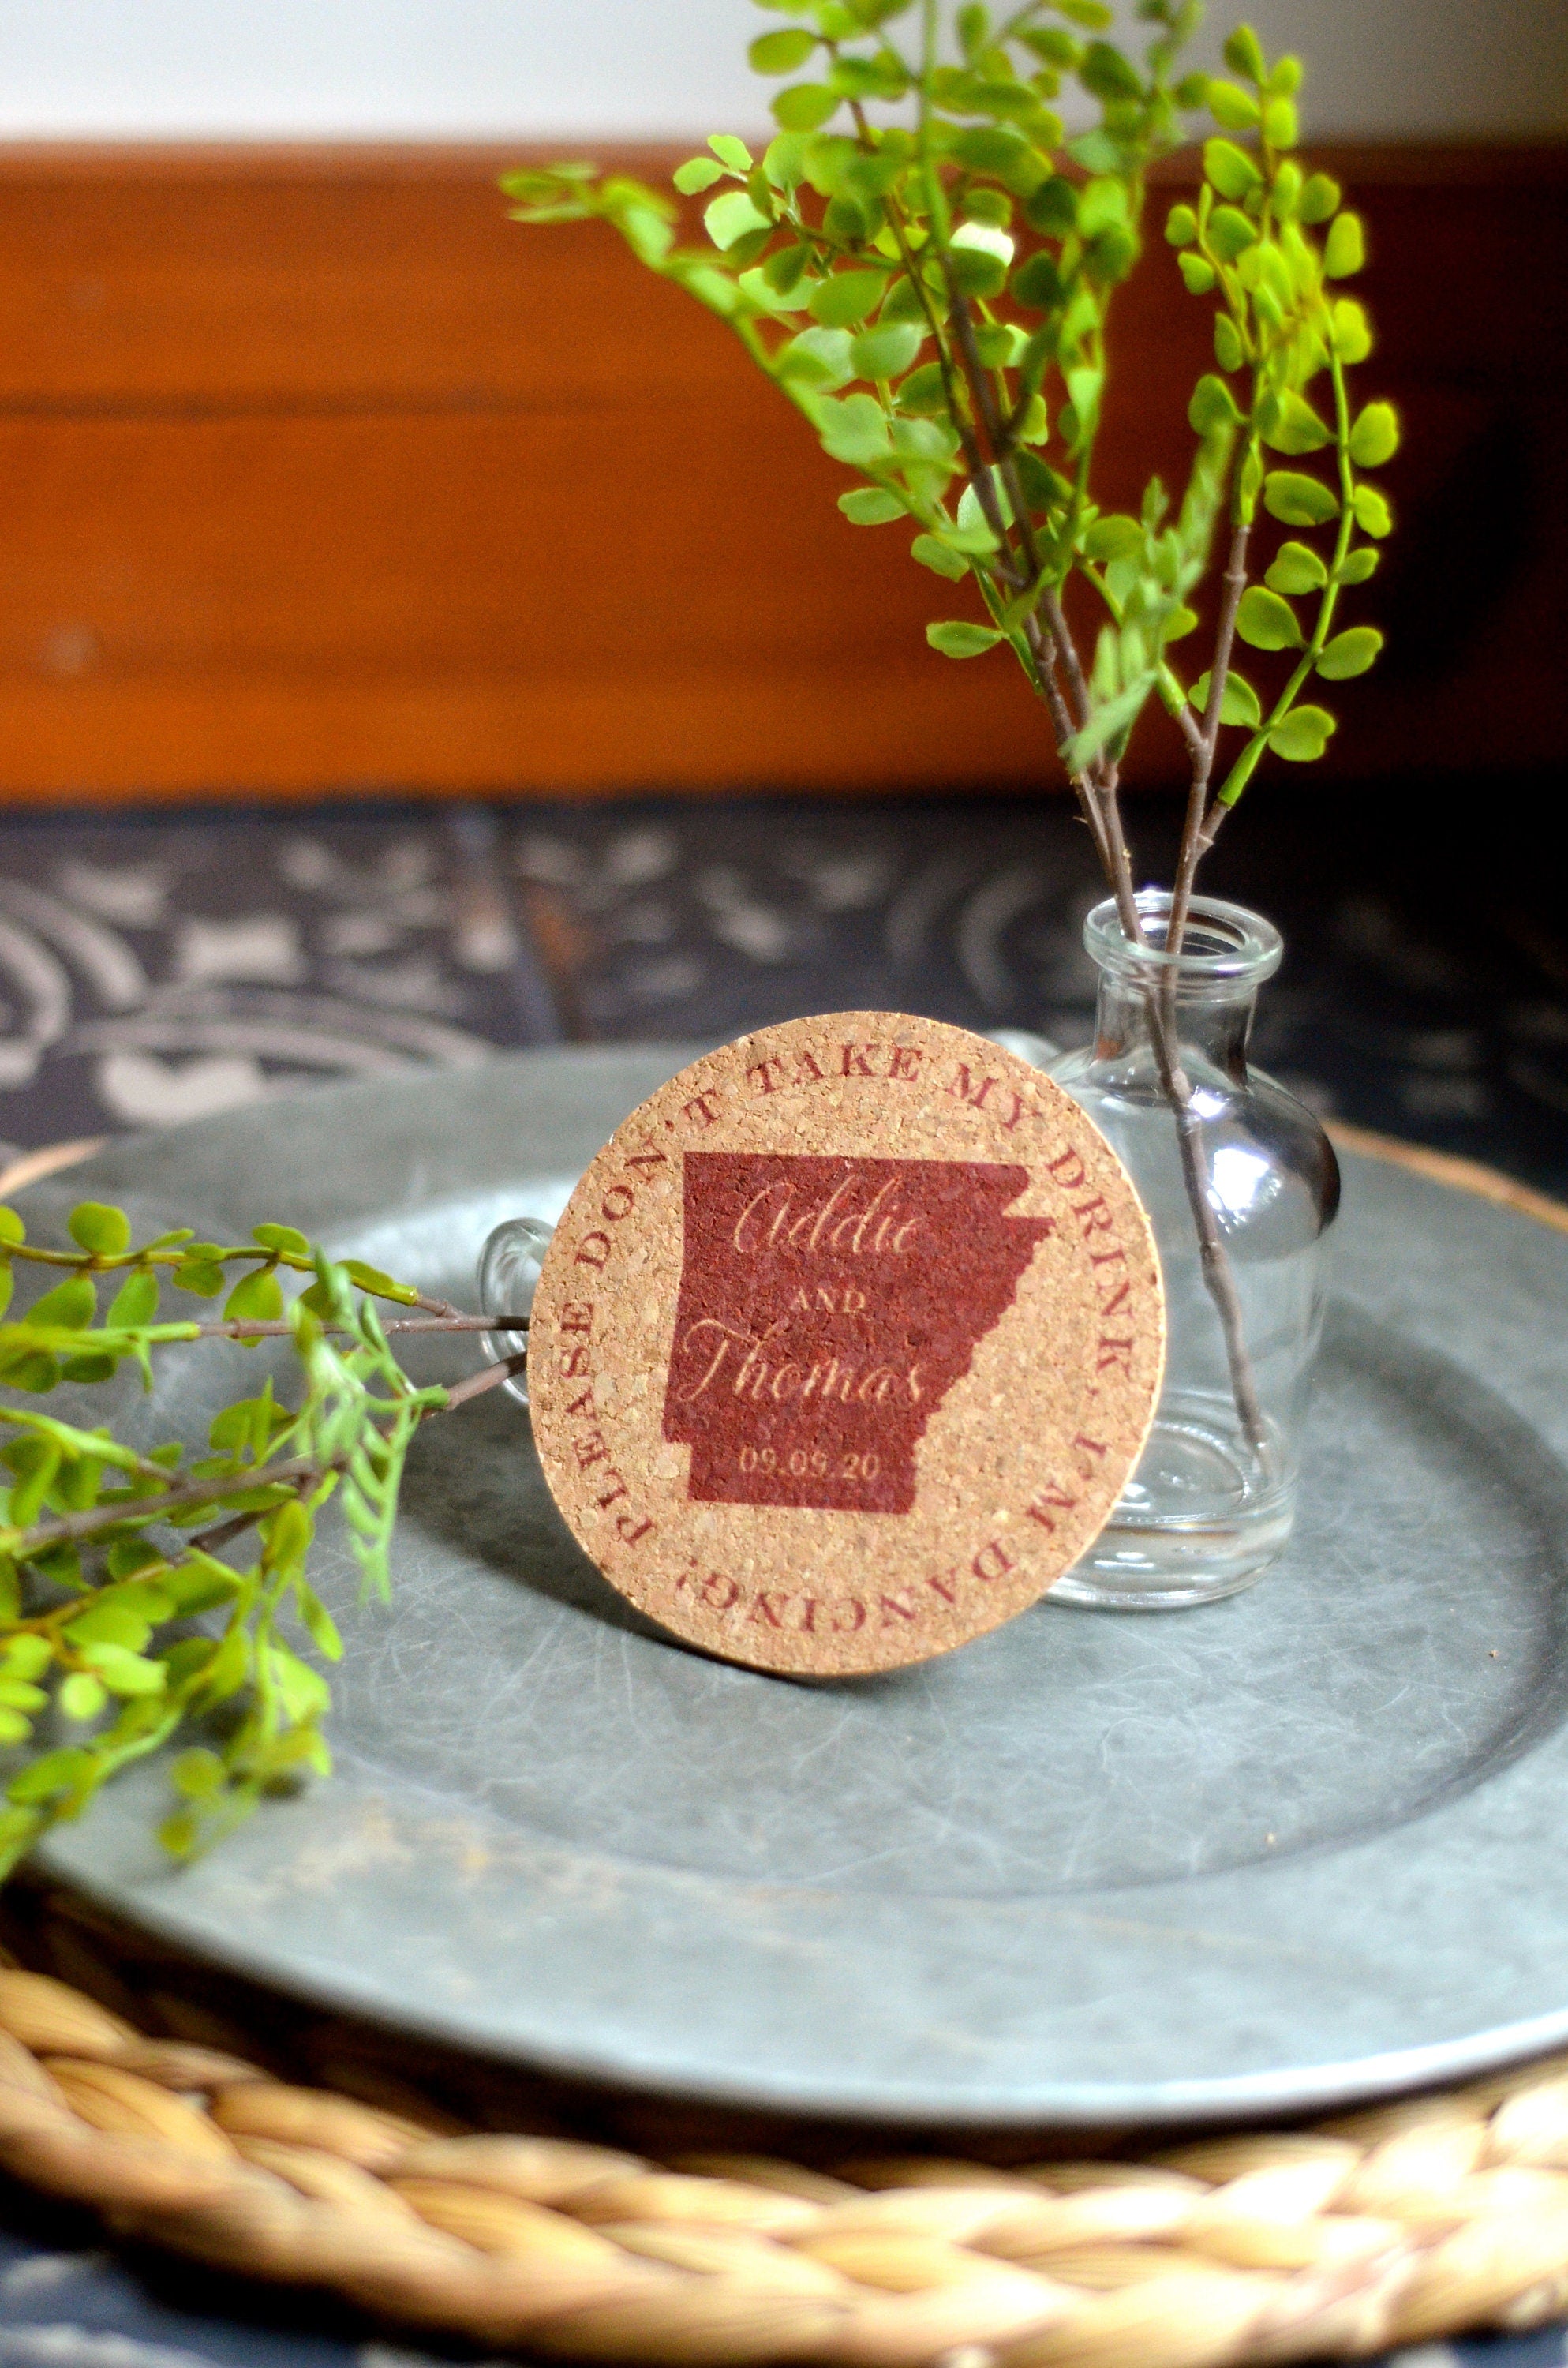 Don&#39;t Take My Drink Arkansas State Cork Coaster Wedding Favors Personalized with Names and Wedding Date / Cork Coaster Favors for Guests